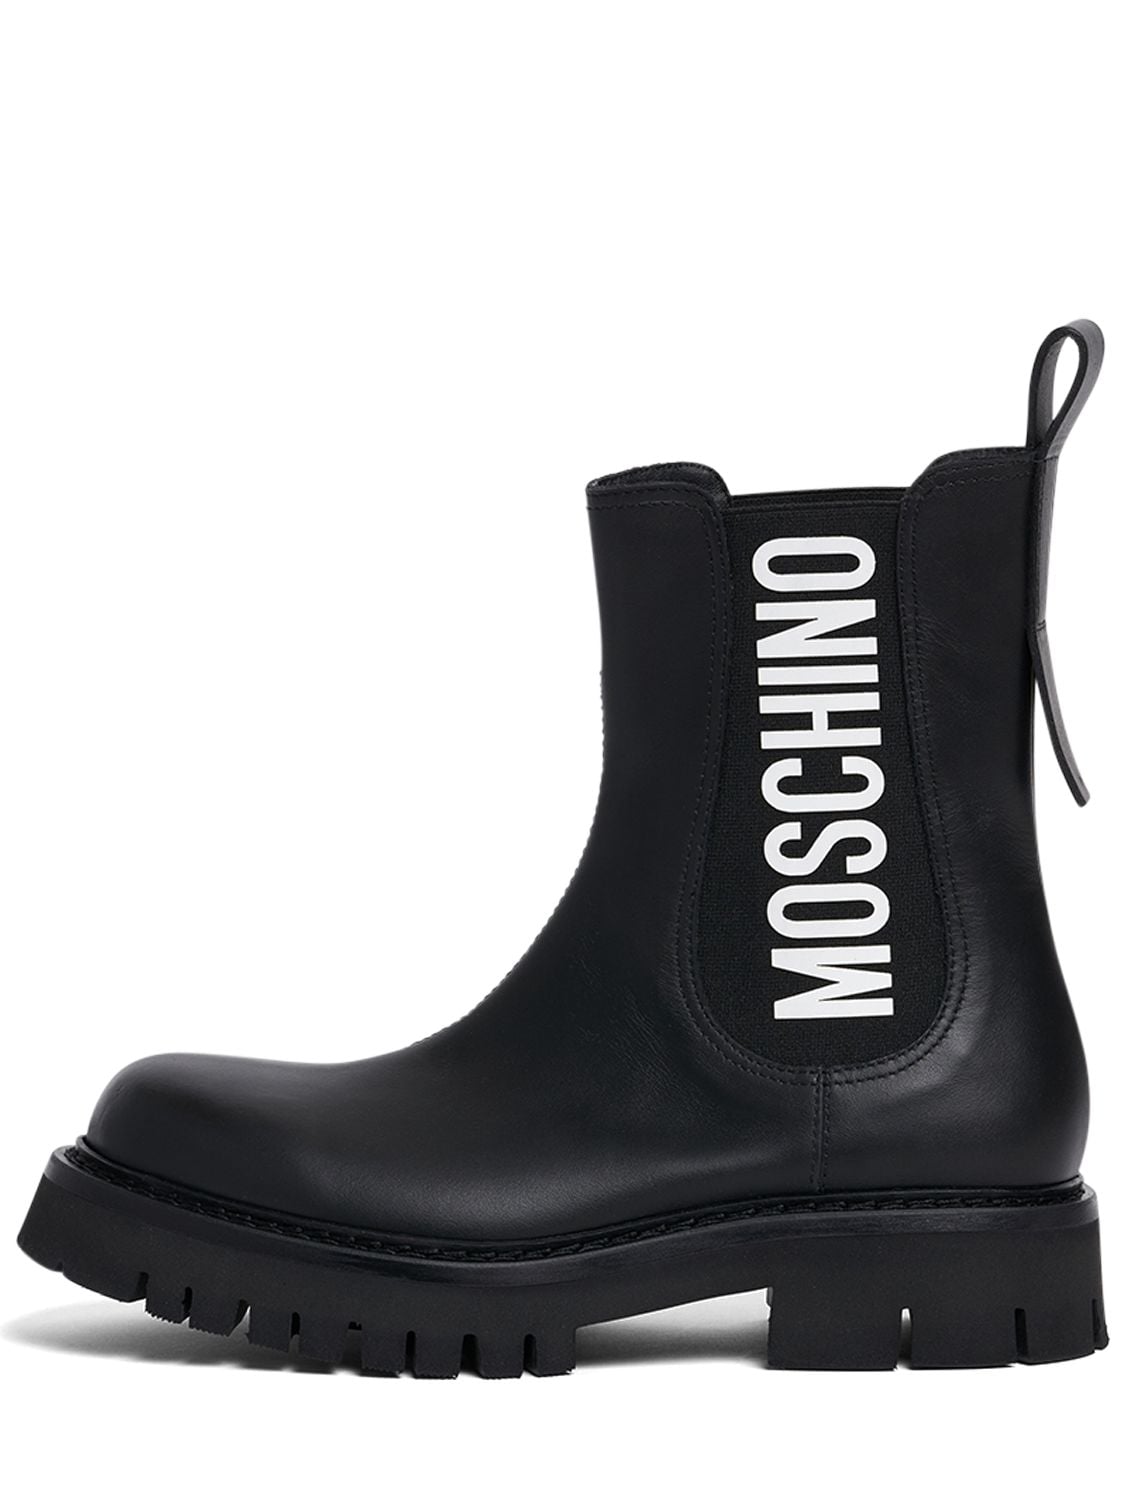 MOSCHINO LOGO PRINT LEATHER CHELSEA BOOTS